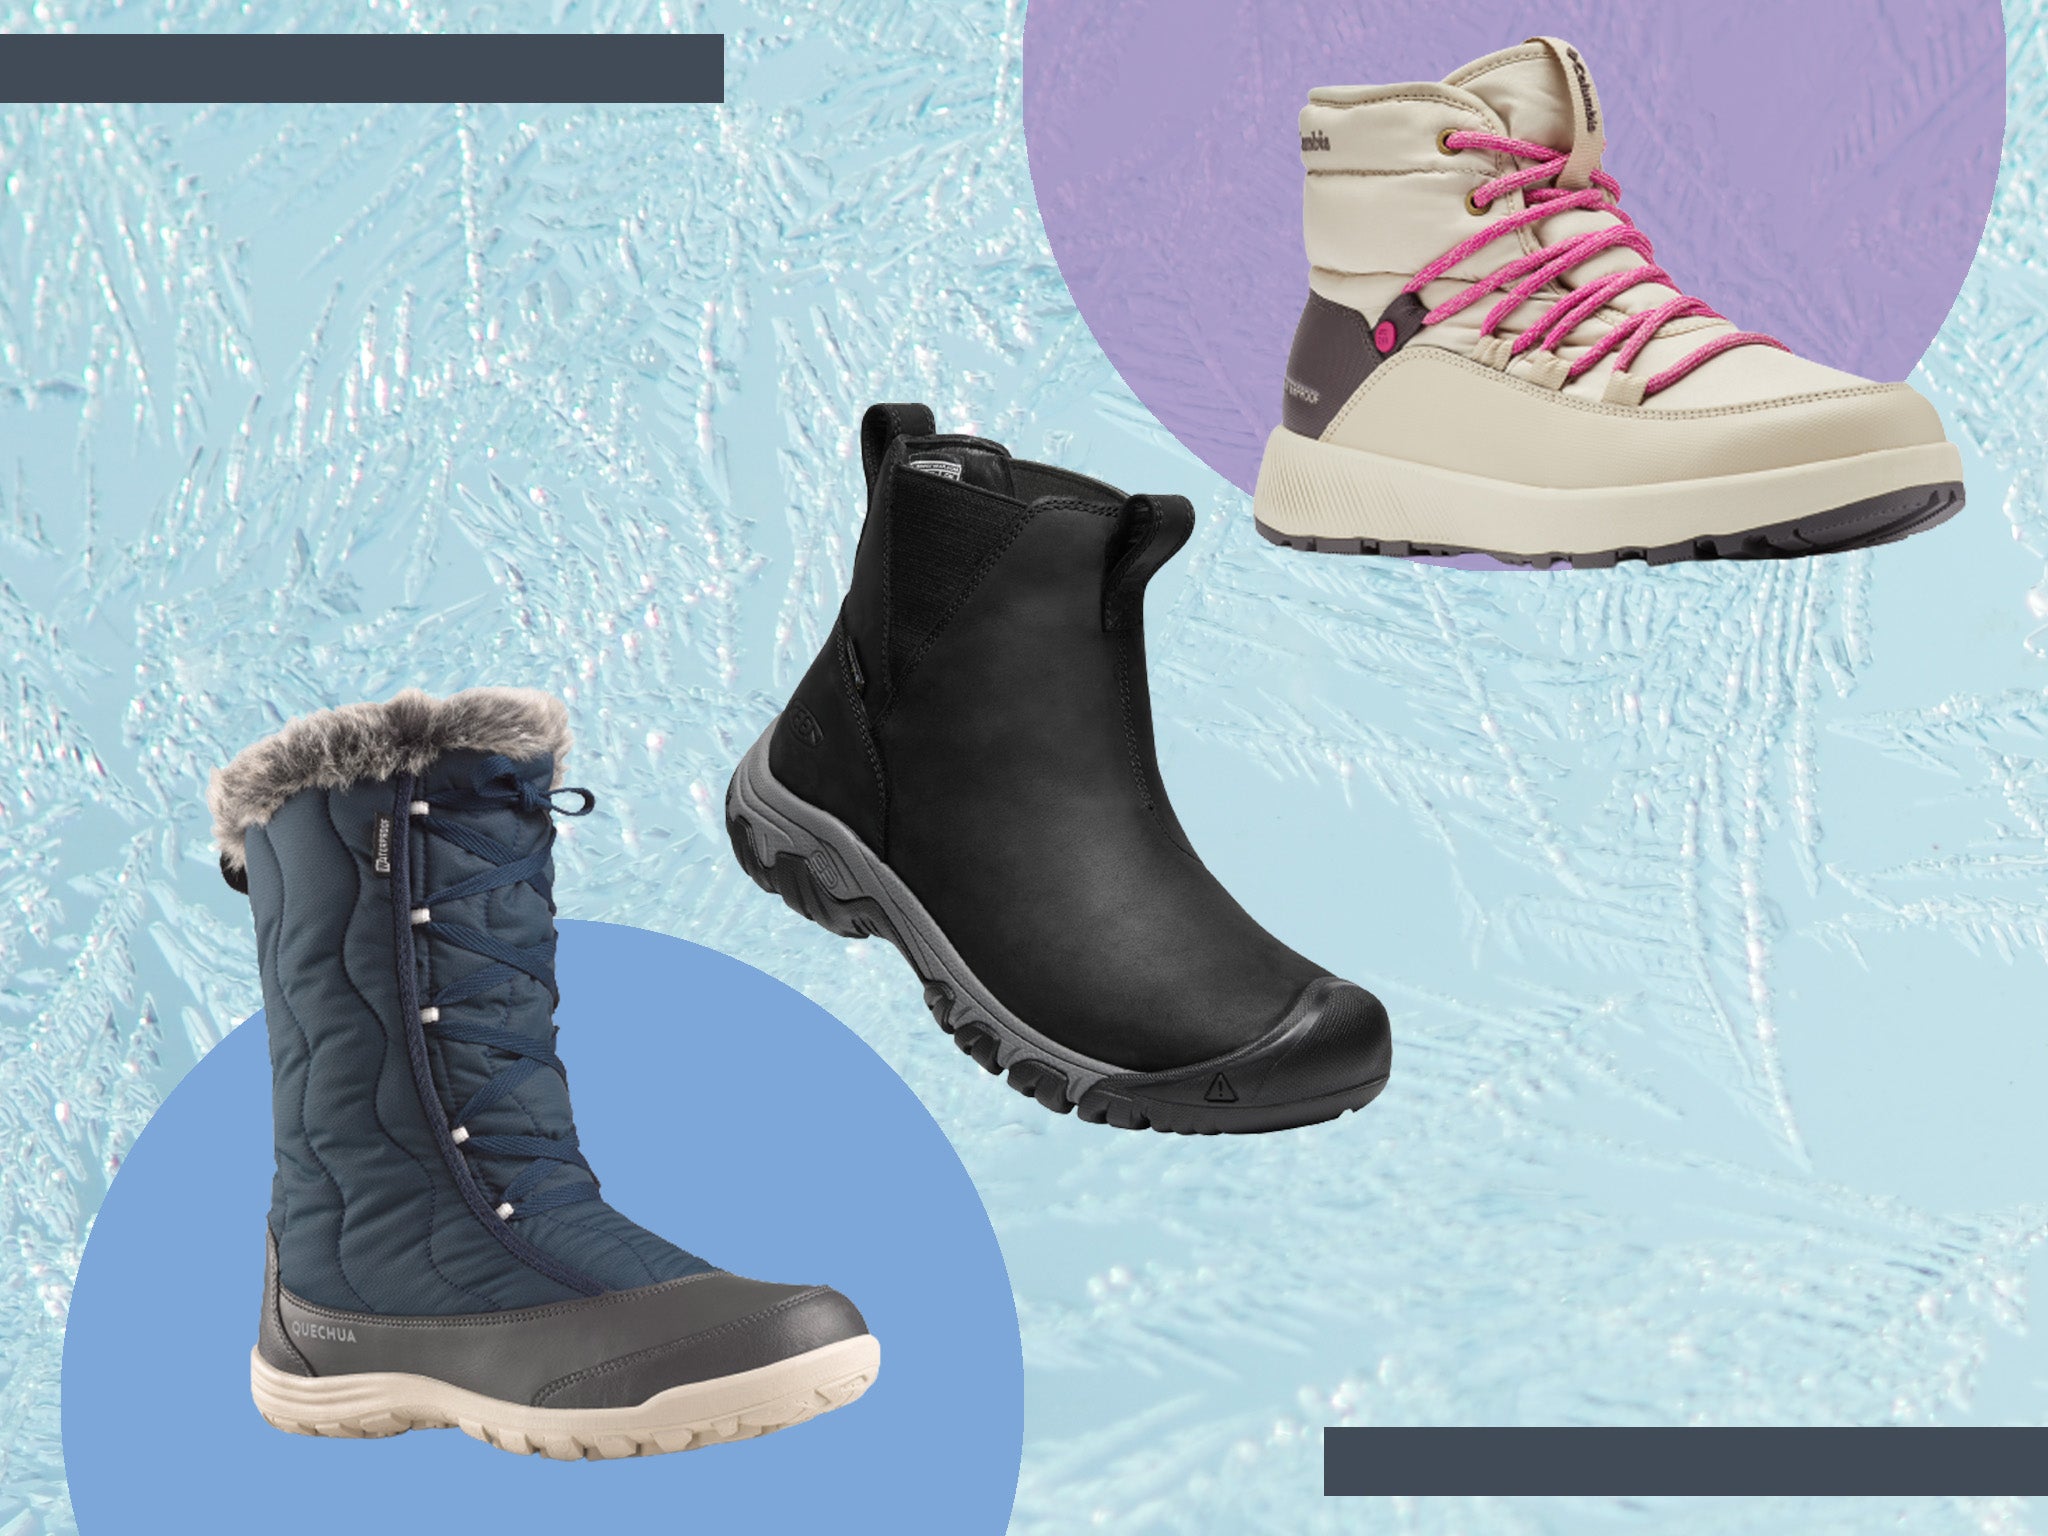 Women/'s Snow Boots in Winter Lightweight to Keep Warm Women/'s Boots. Side Zippered Women/'s Shoes Non-Slip Waterproof and Warm Snow Boots